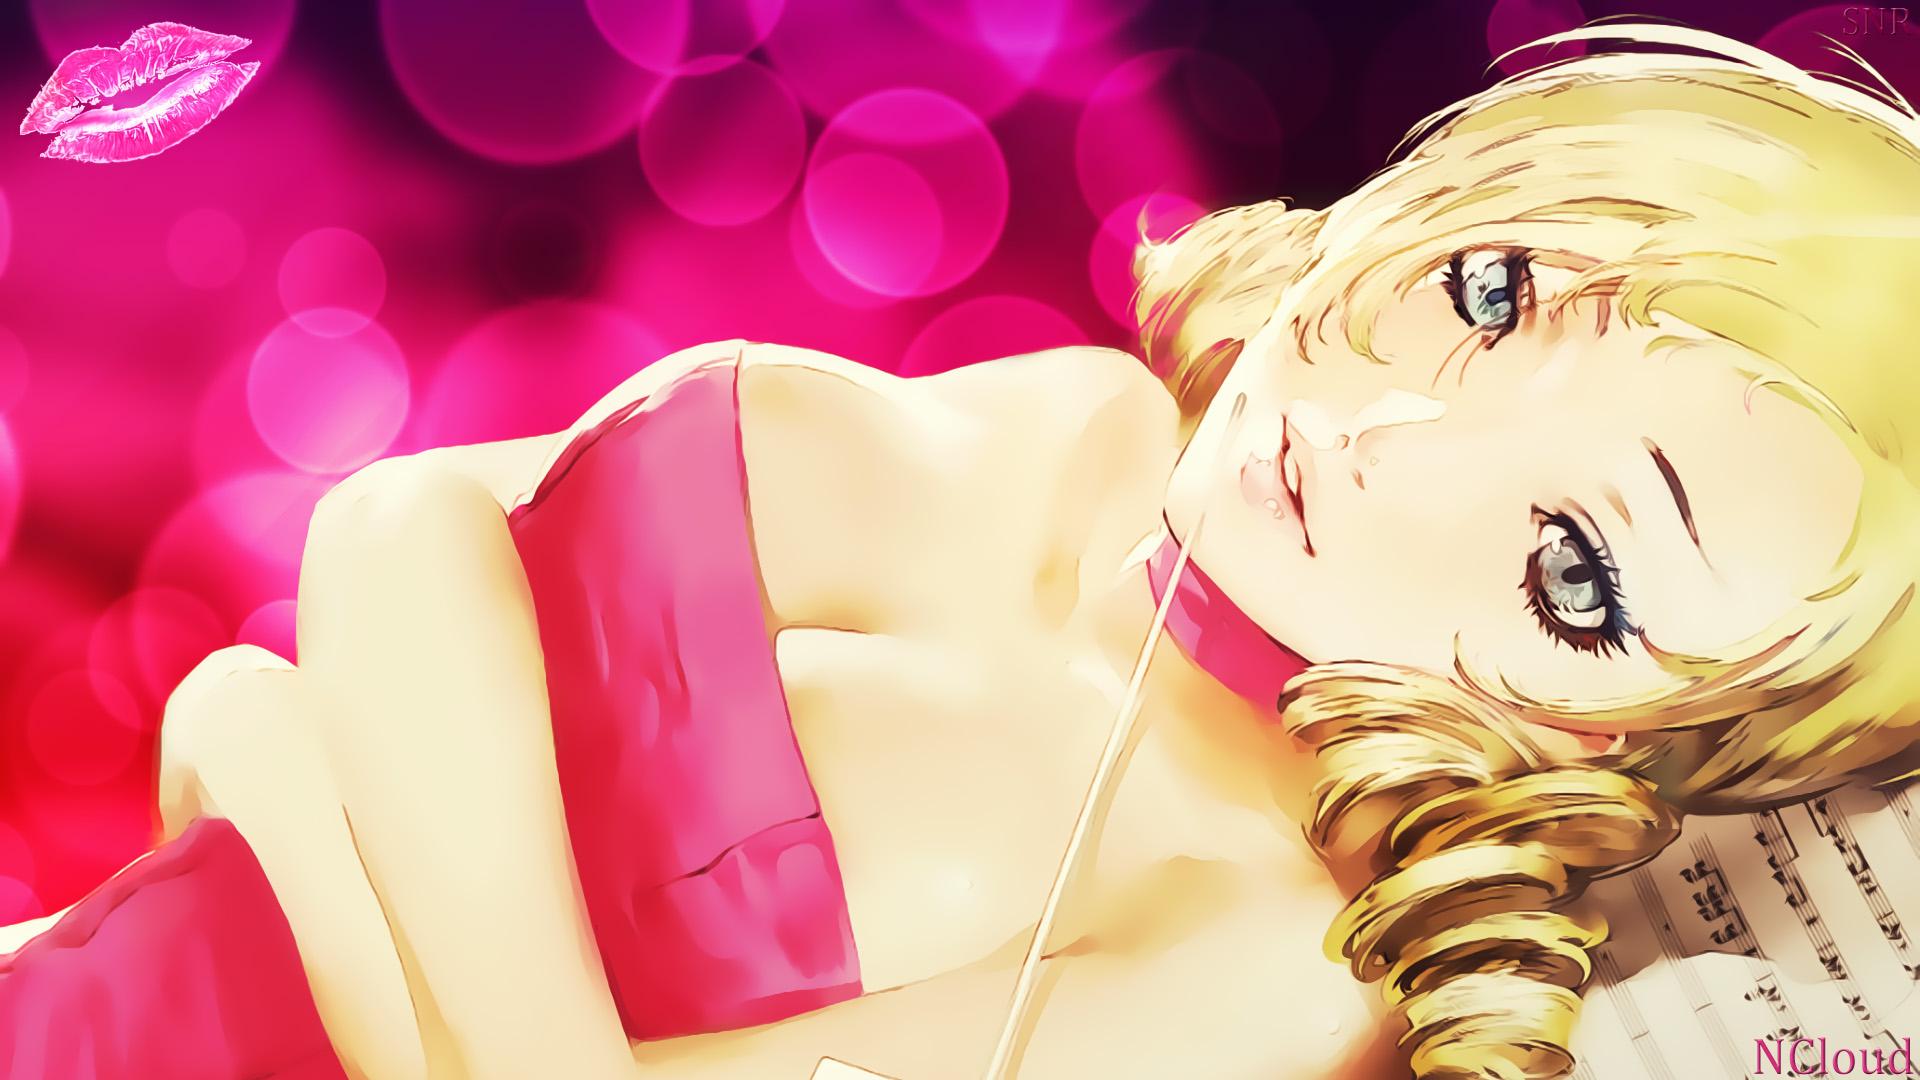 Catherine Video Game Wallpaper